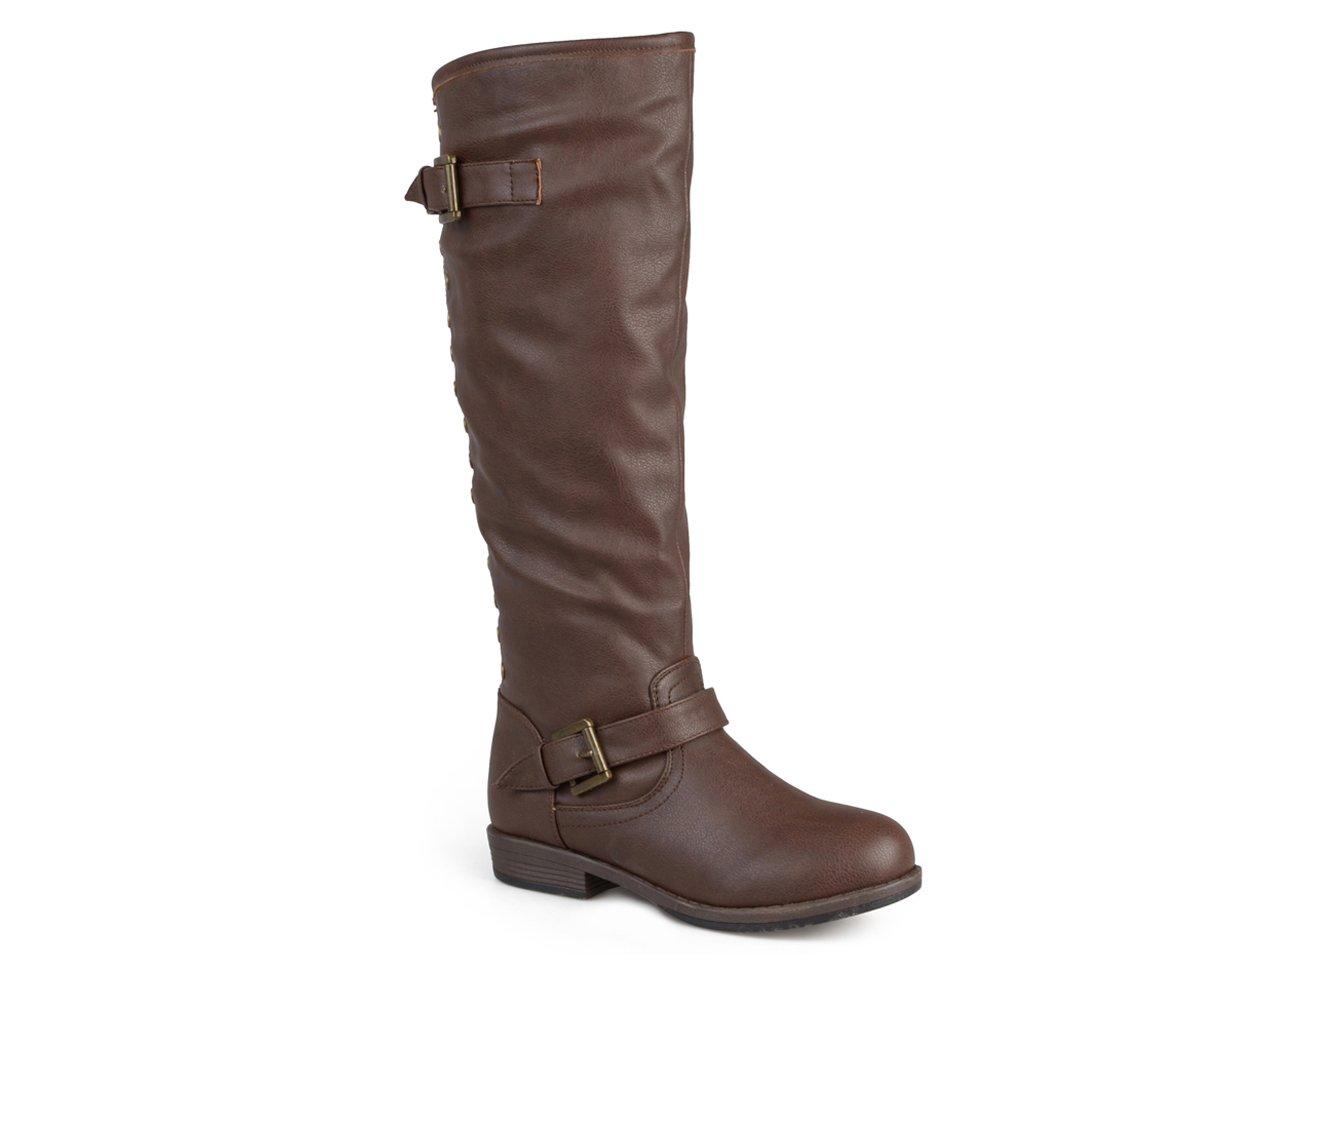 Women's Journee Collection Kane Wide Calf Over-The-Knee Boots